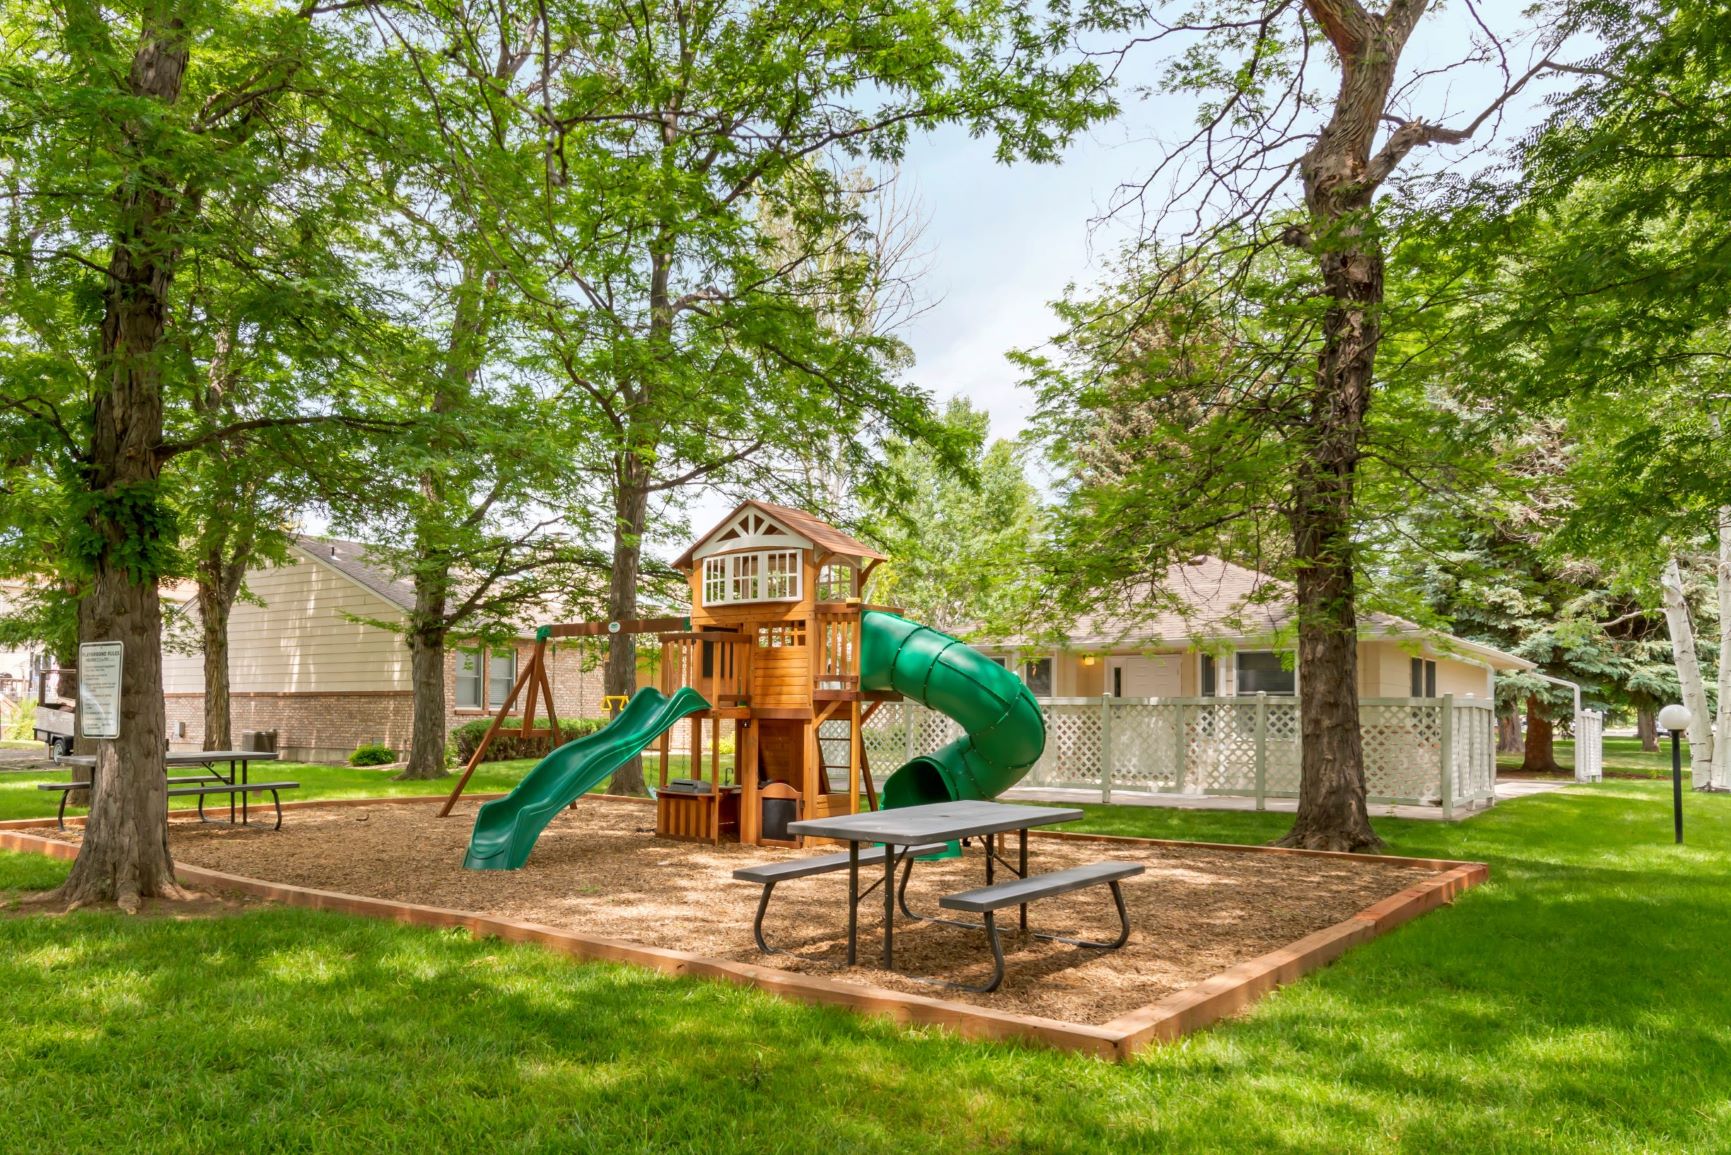 Community playground with two picnic tables, multiple slides, swings, and rock climbing wall.